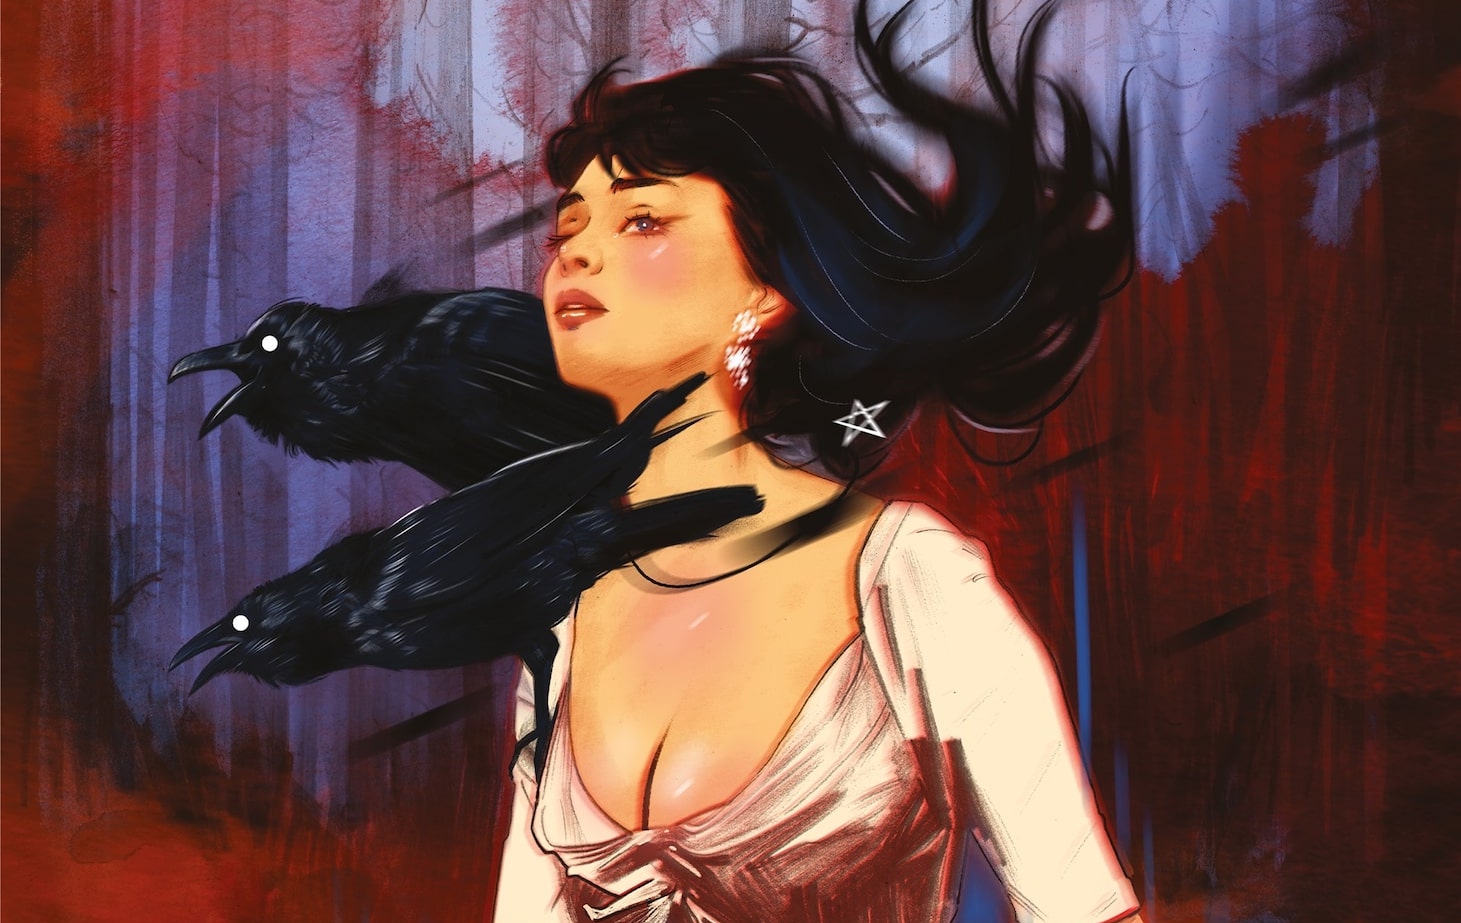 Gail Simone, Aly Fell, and Letty Wilson talk 'Misty' horror comic anthology